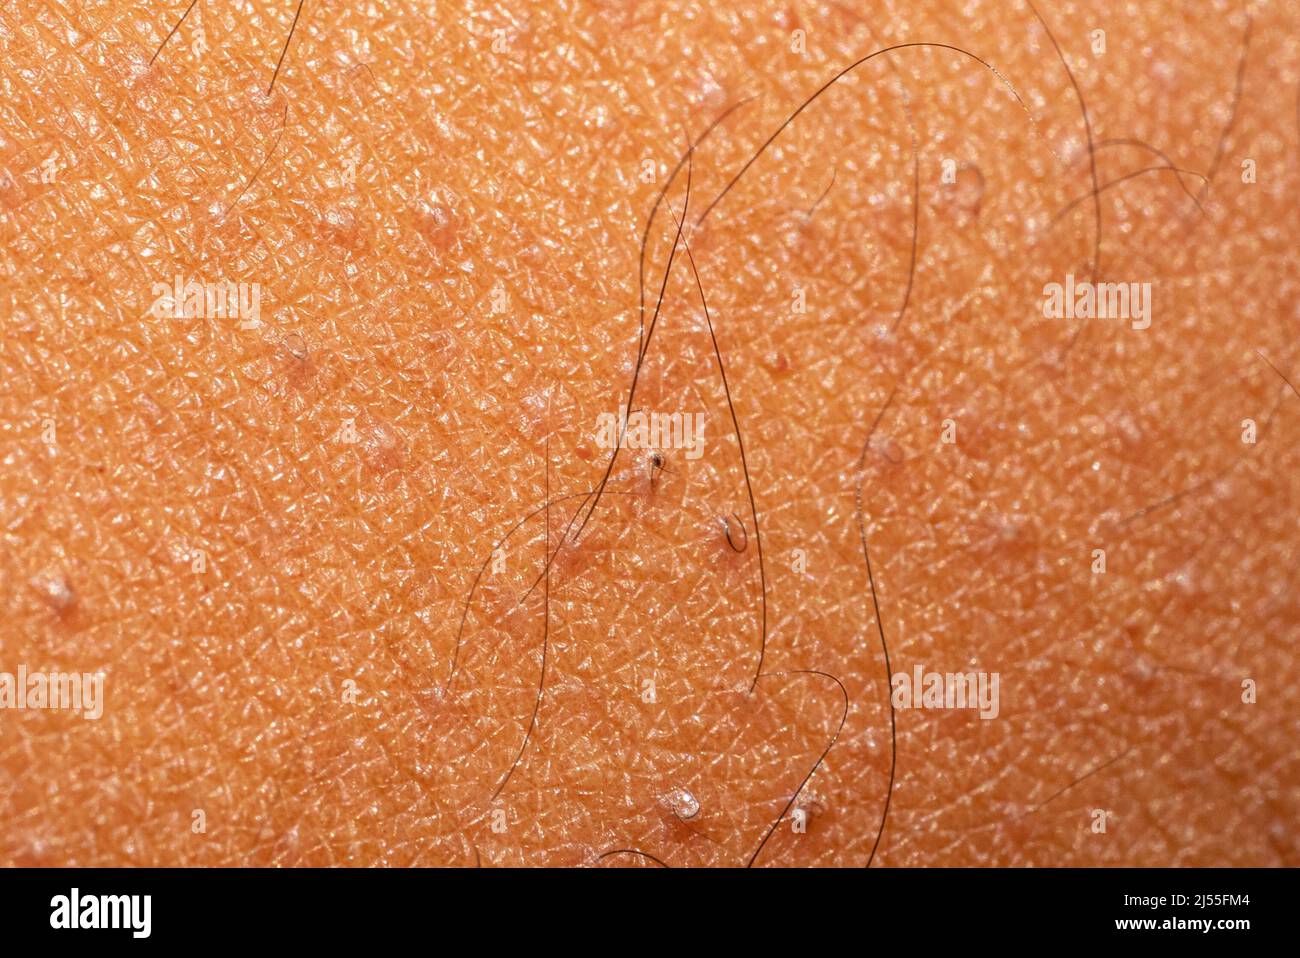 Macro shot of brown skin with Keratosis Pilaris and ingrown hairs. The skin detail and texture is clearly visible. Stock Photo